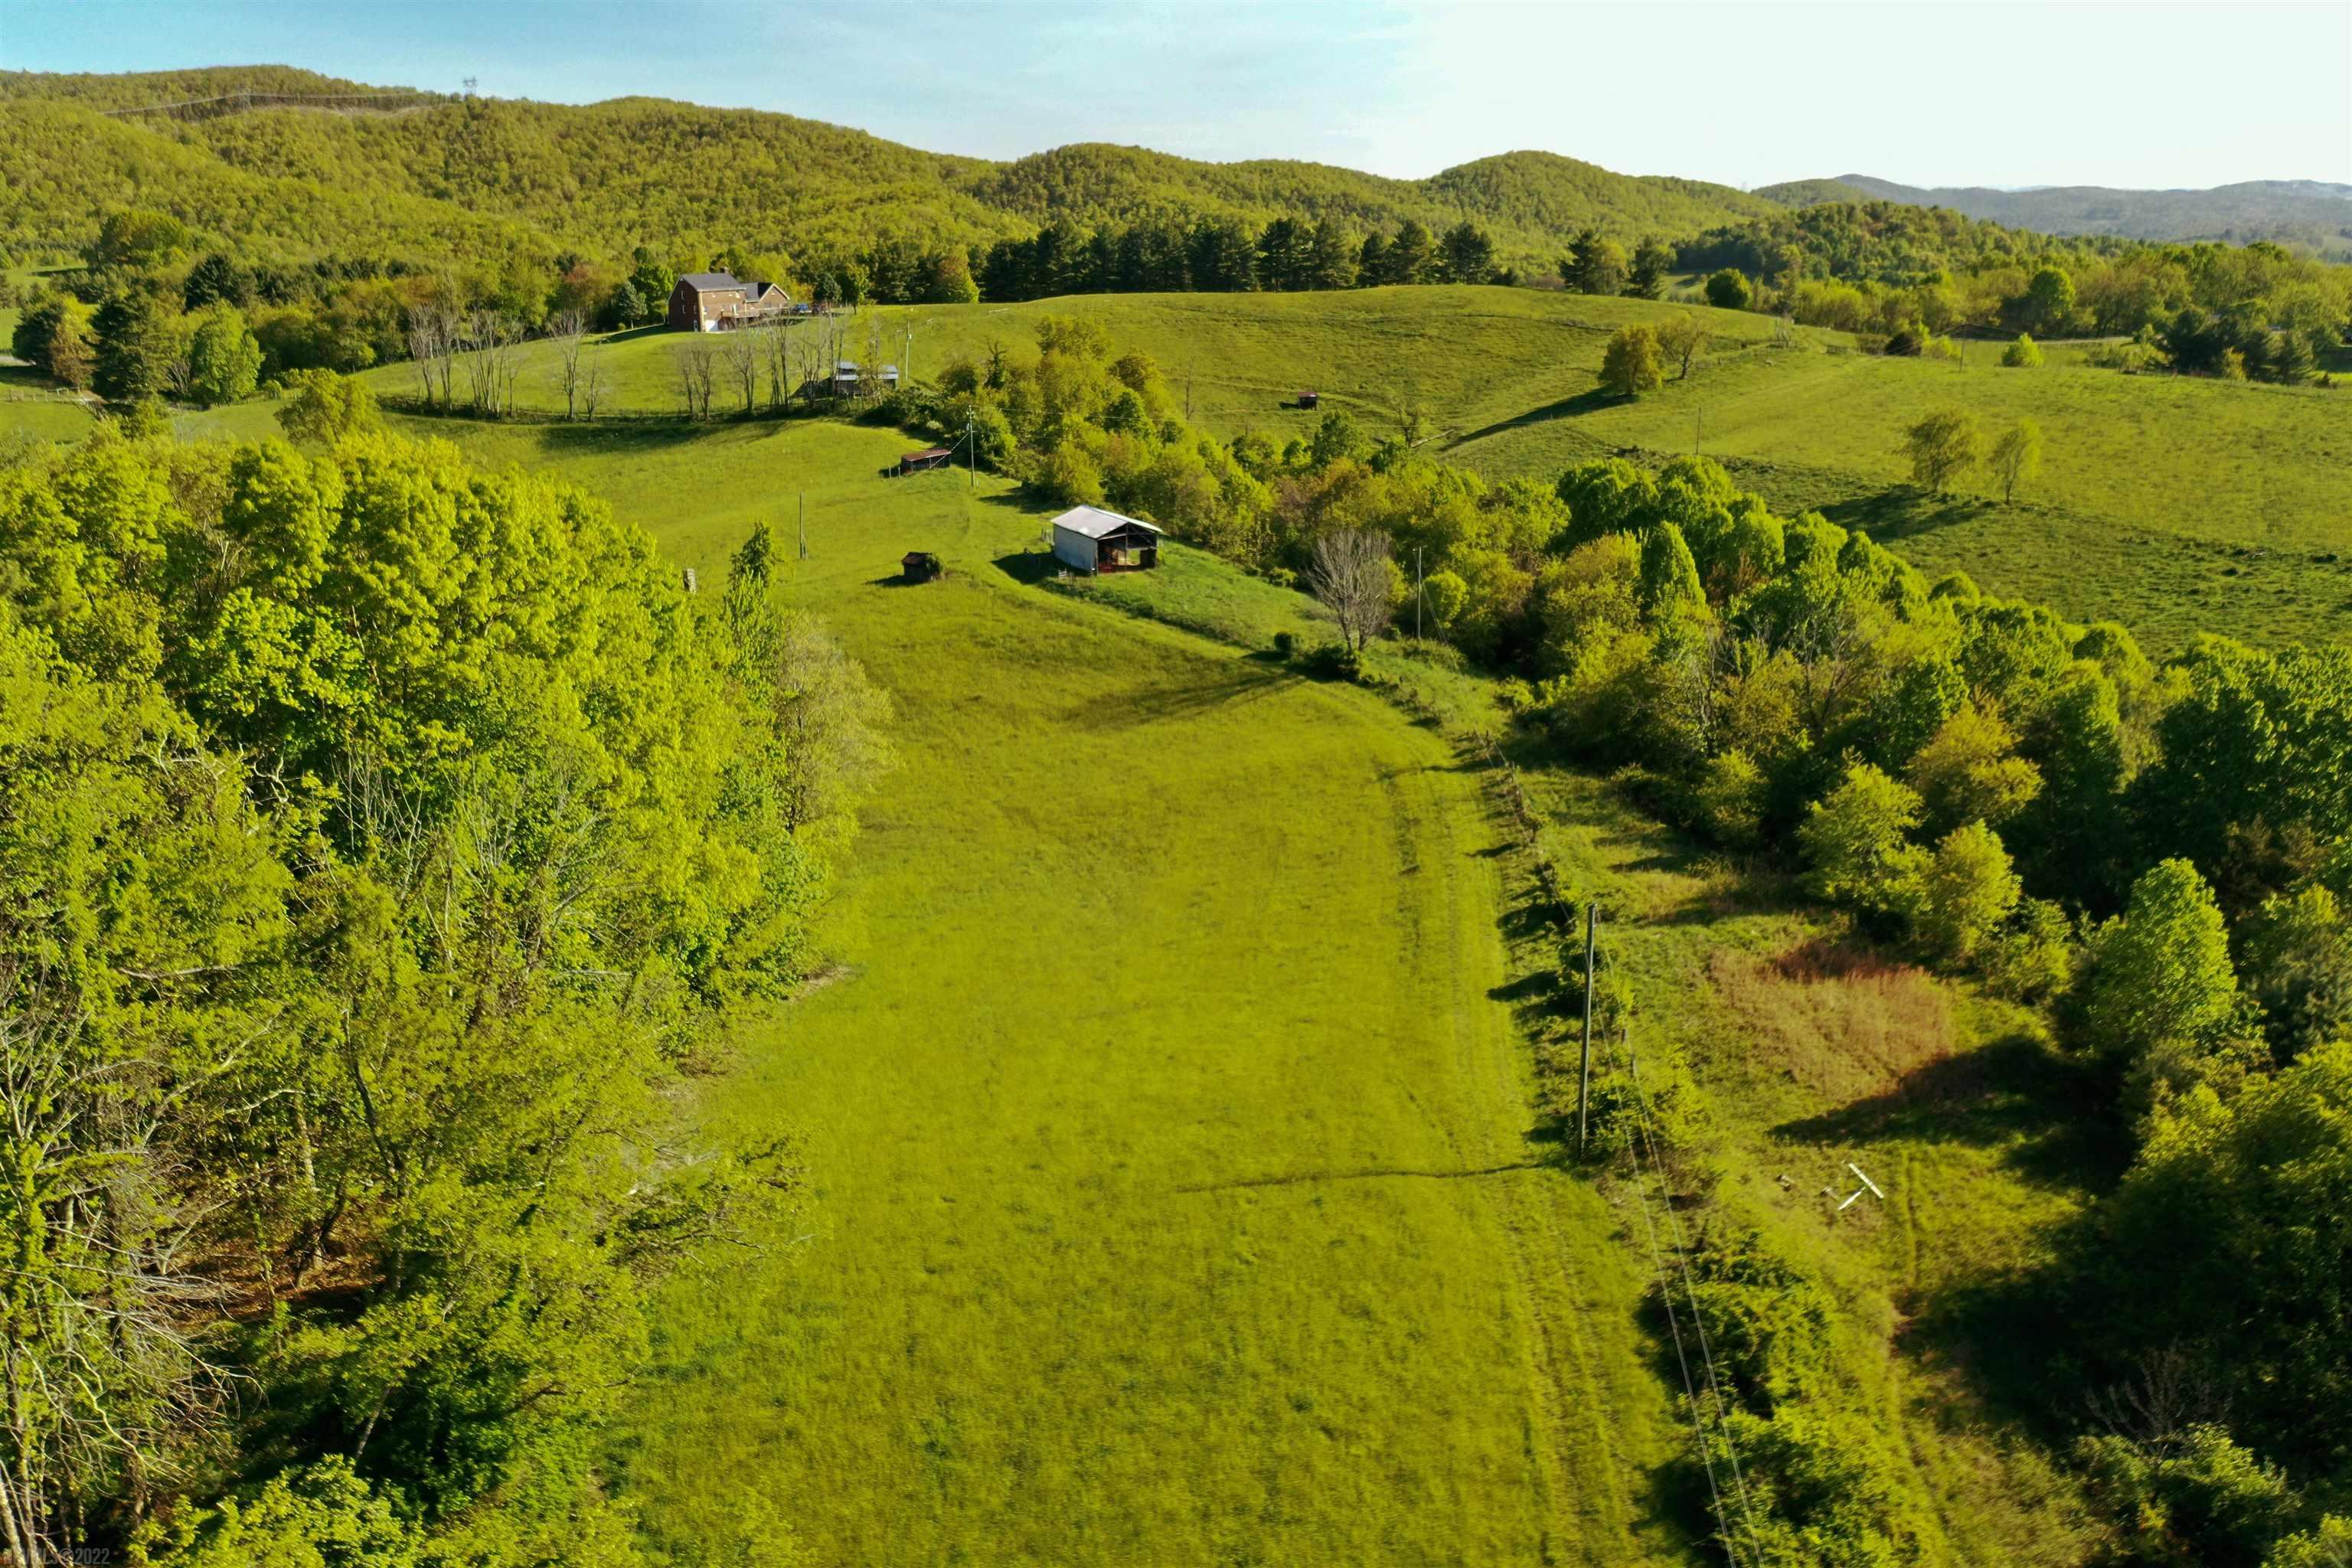 Beautiful rolling hills with long-range, south-facing view at existing home site with septic in place.  A barn and out buildings make this a nice horse or livestock property.  The mixture of pasture, woods and level land provides plenty of optionality for the land owner.  The spring has previously provided water for the home site and the barn.  High Speed Fiber Optic internet service available.  Enjoy the peace and quite of the rural lifestyle with the convenience of working from home.